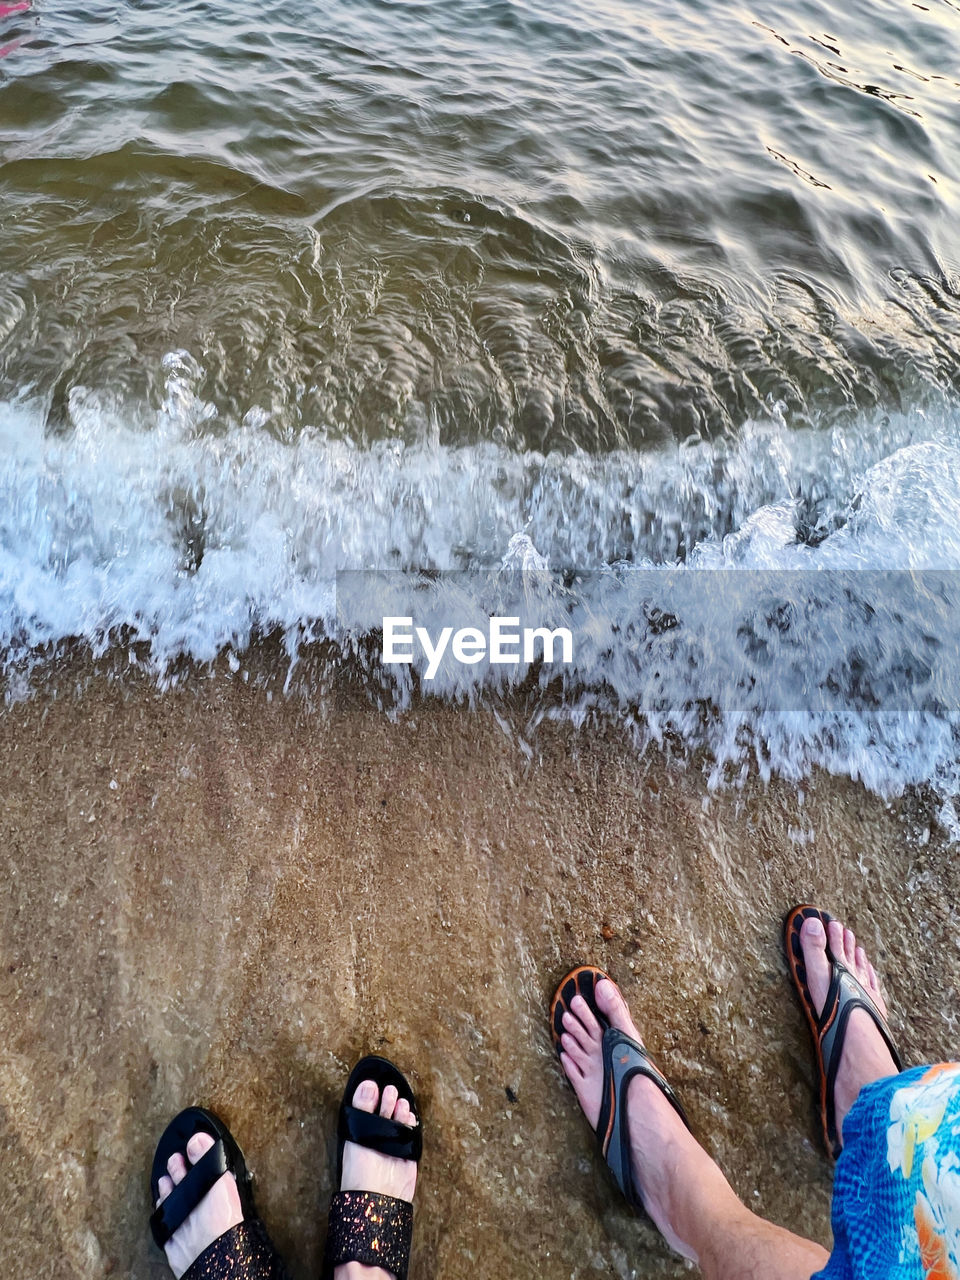 water, beach, low section, human leg, shoe, land, sea, sand, lifestyles, personal perspective, leisure activity, high angle view, day, nature, water sports, standing, surfing, men, sandal, sports, wave, shore, two people, outdoors, ocean, human foot, adult, women, coast, motion, togetherness, flip-flops, vacation, trip, beauty in nature, limb, holiday, wet